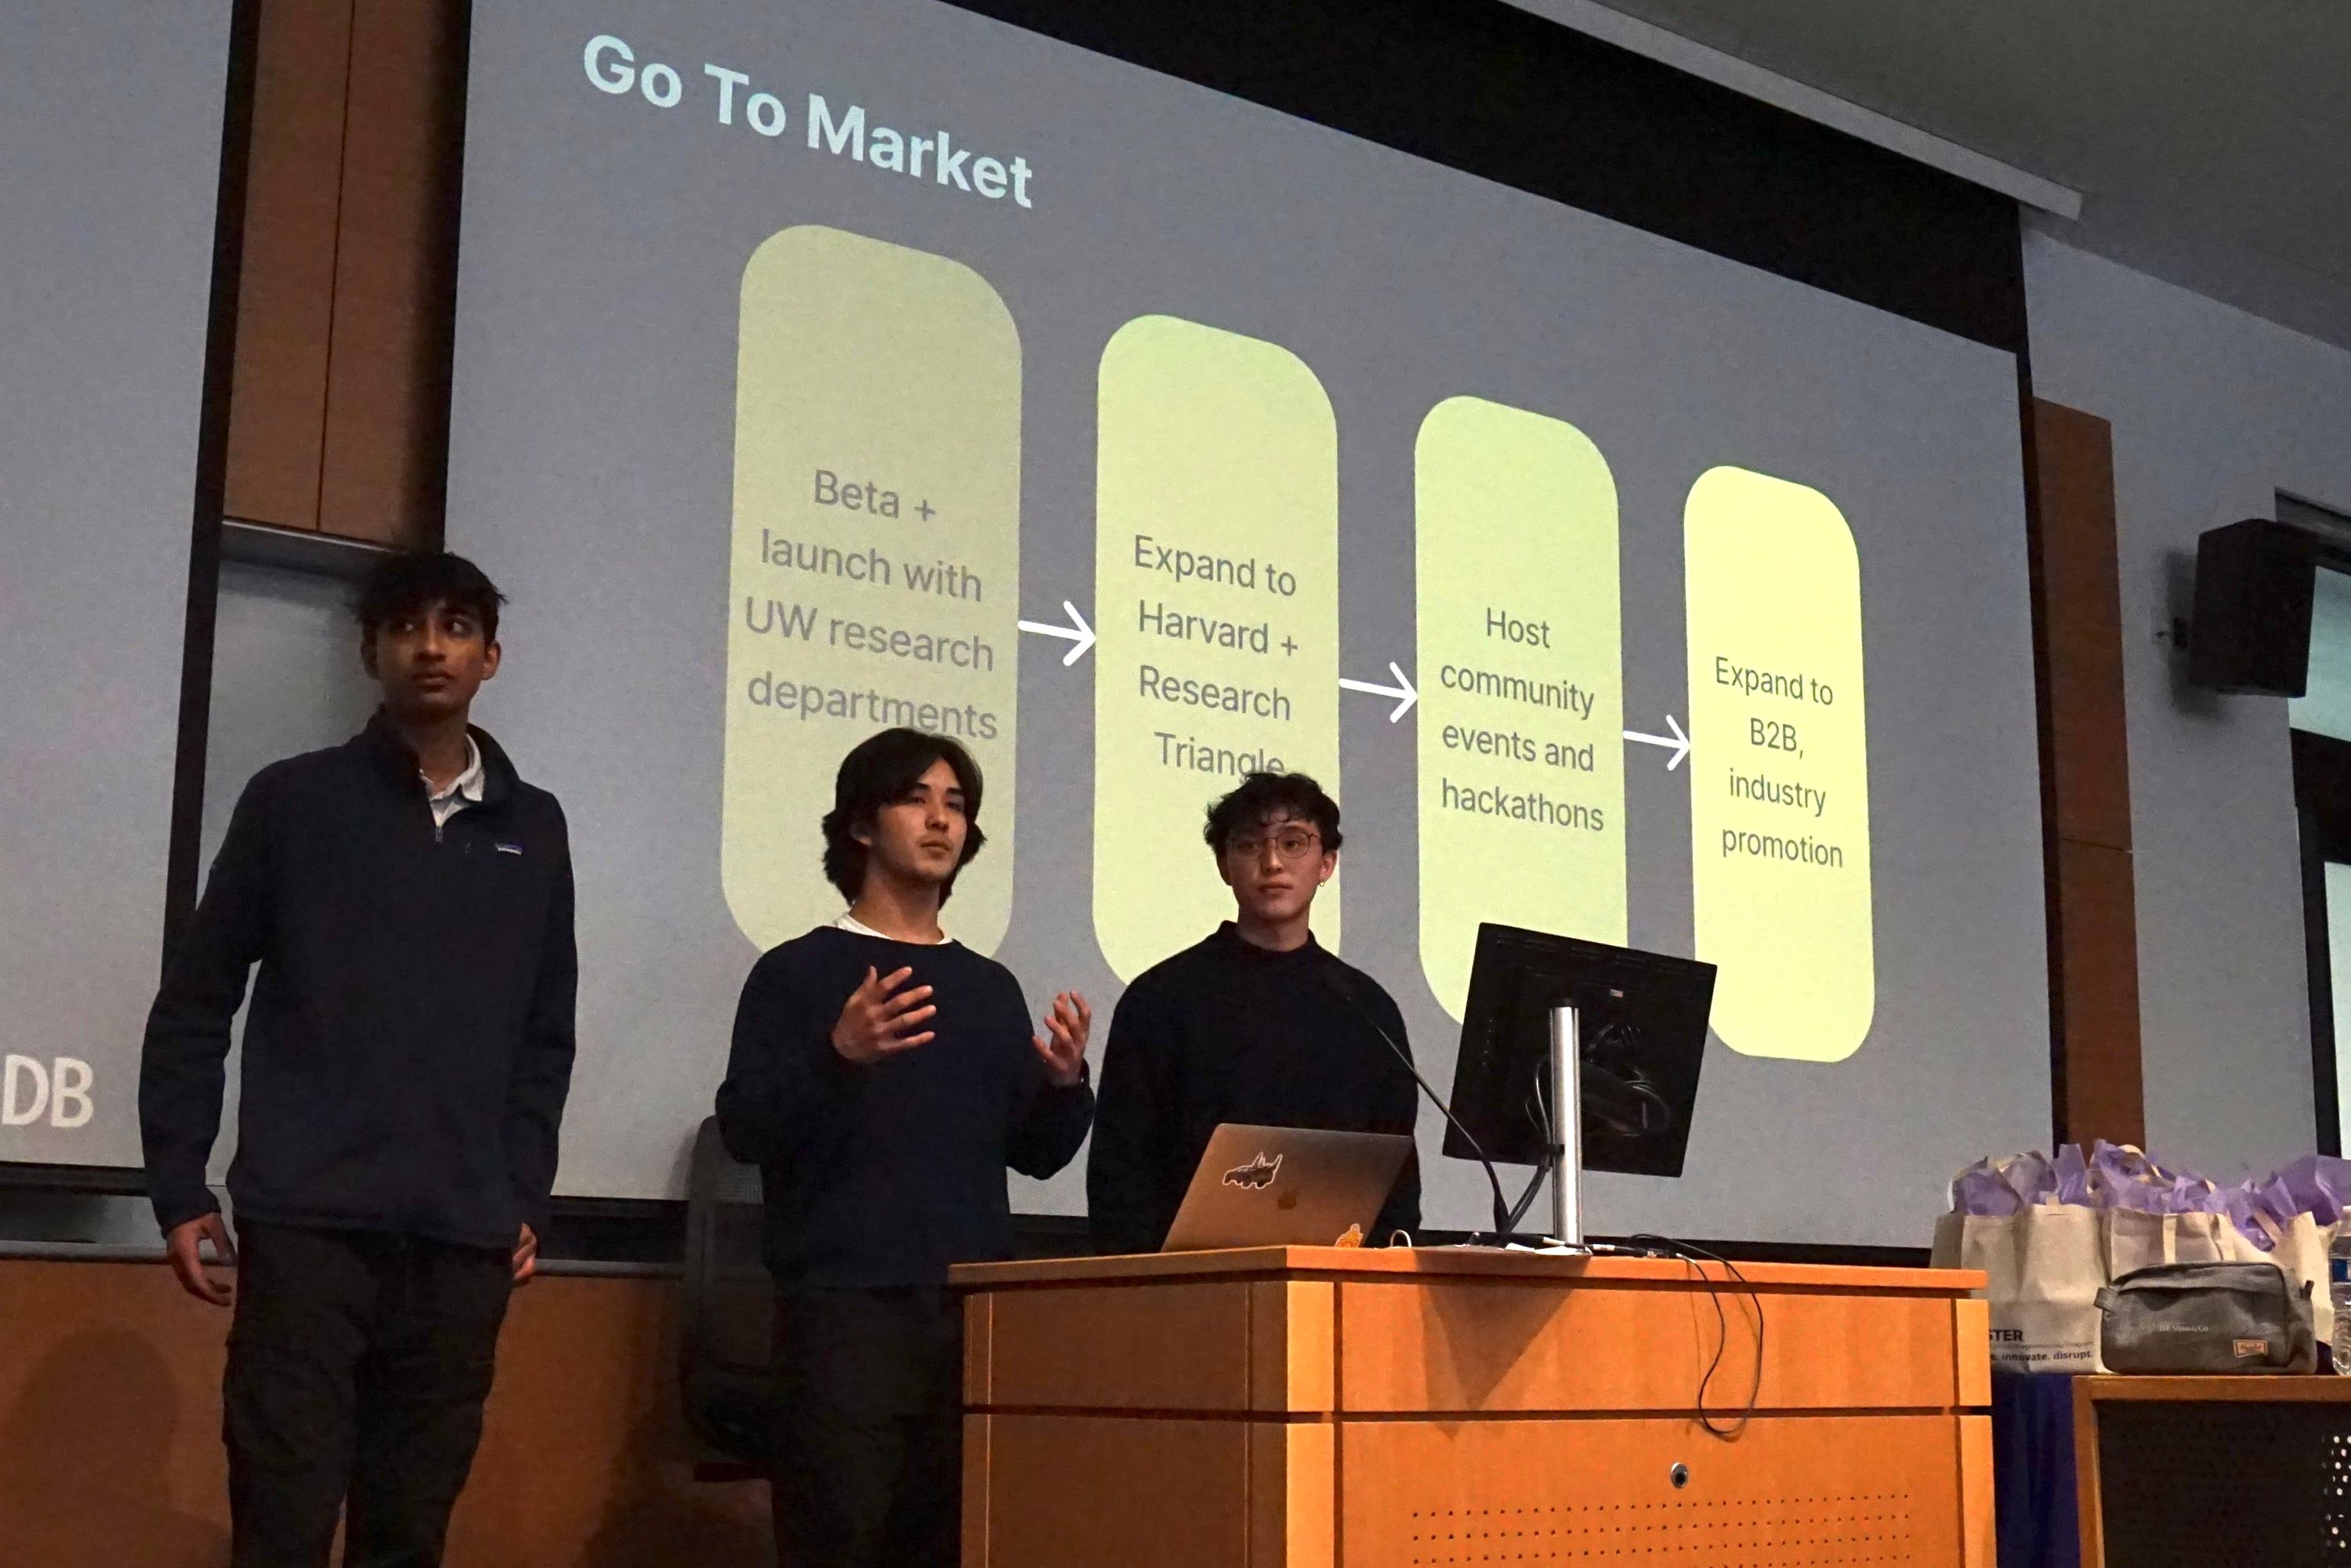 Explaining our go-to-market plan at the startup pitch competition where we had the idea for Odin.